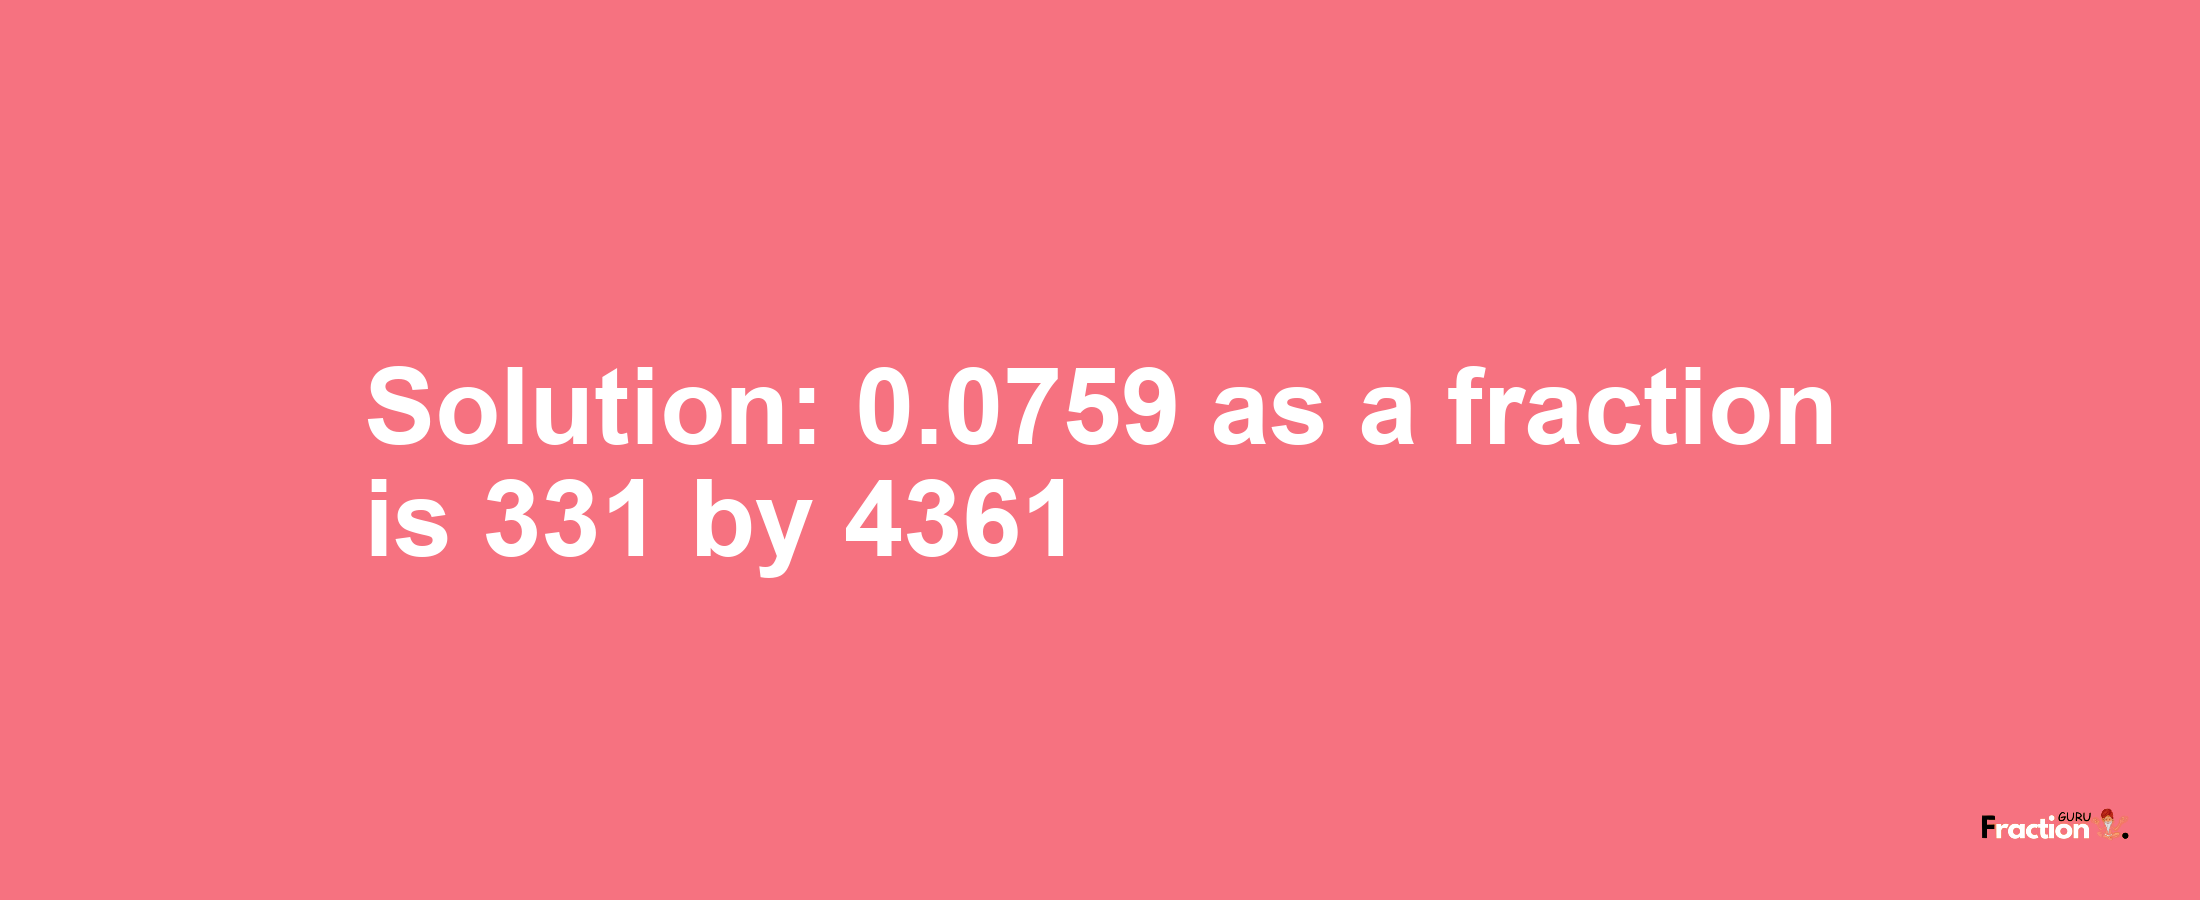 Solution:0.0759 as a fraction is 331/4361